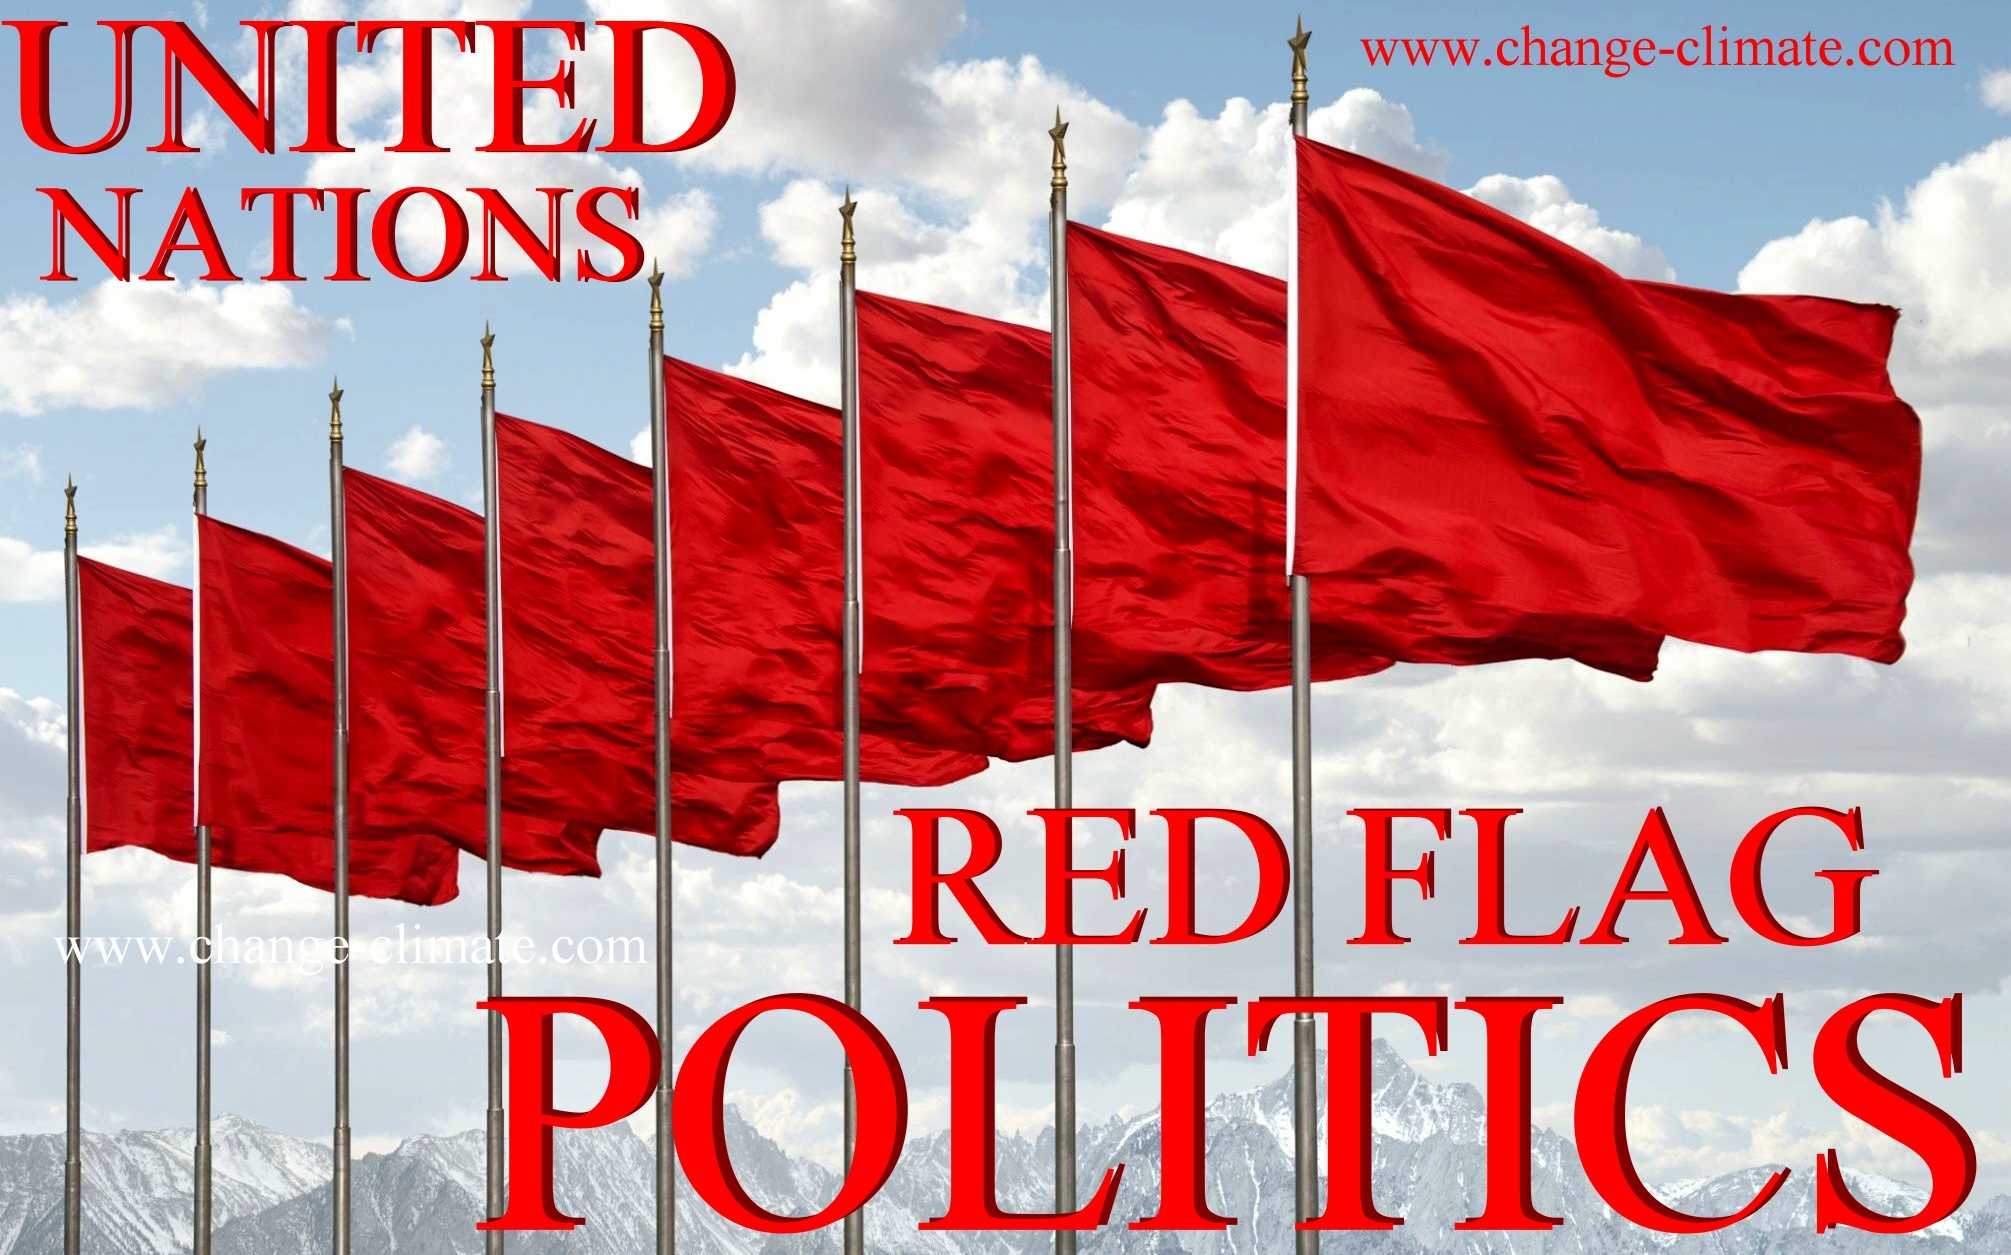 Red flag politiians delay essential changes to be able to profit while the planet dies